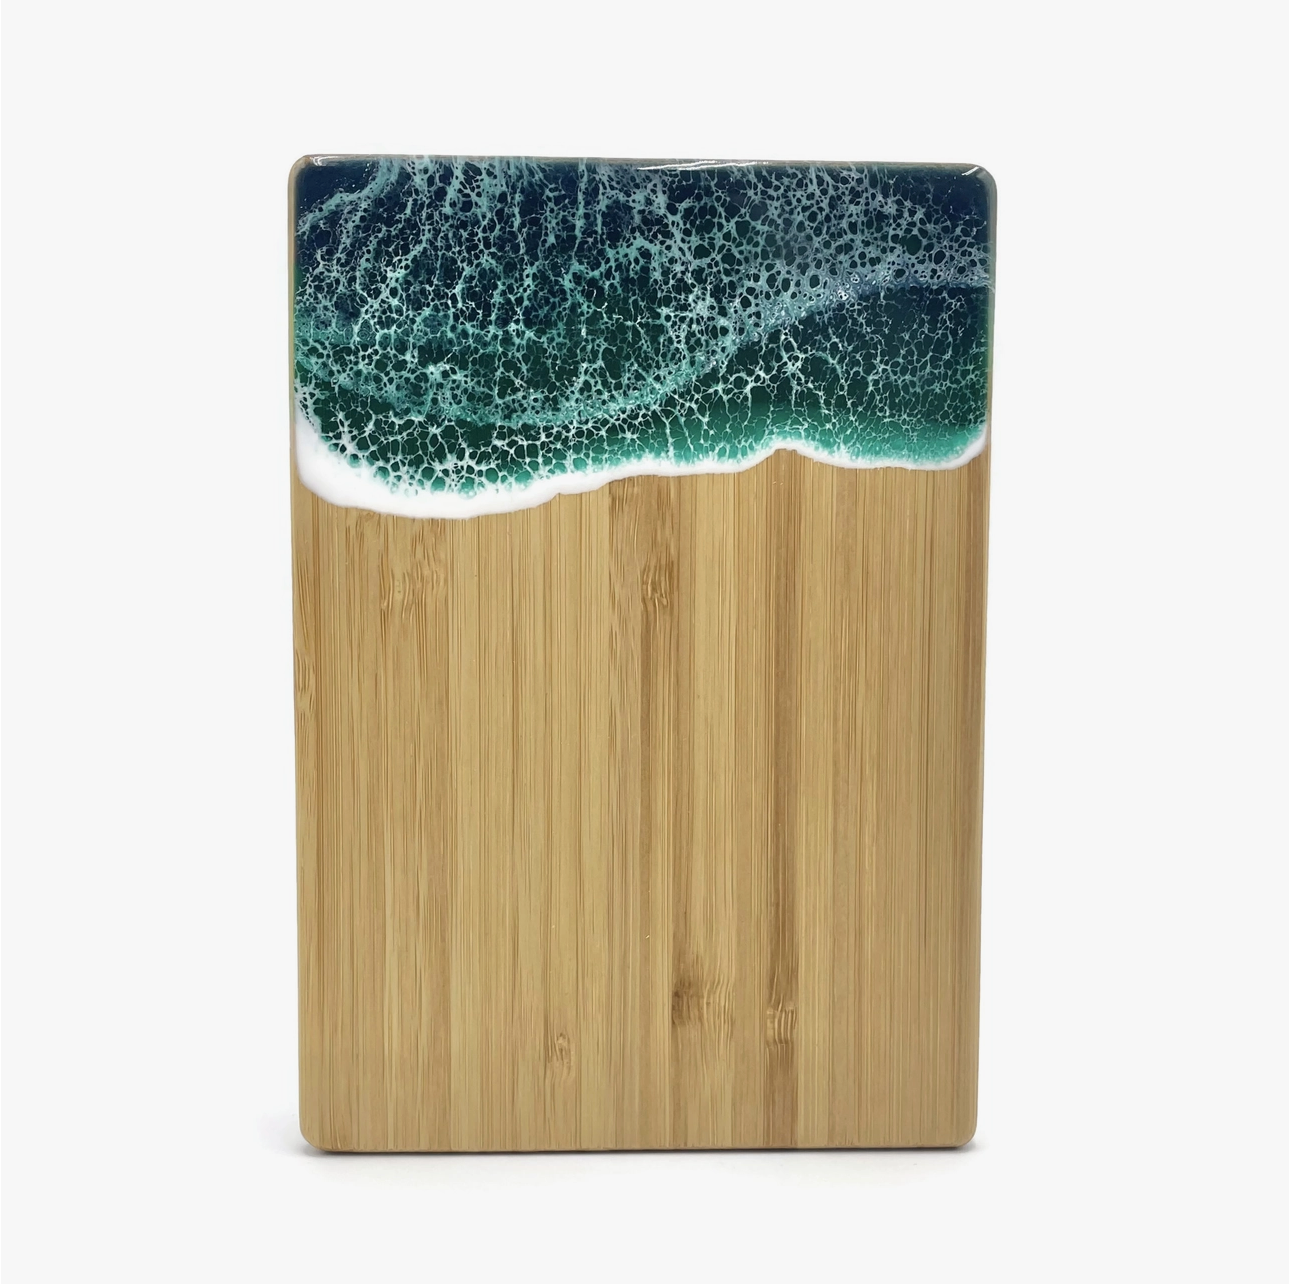 Small Cutting Board in Tropica - Heart of the Home LV